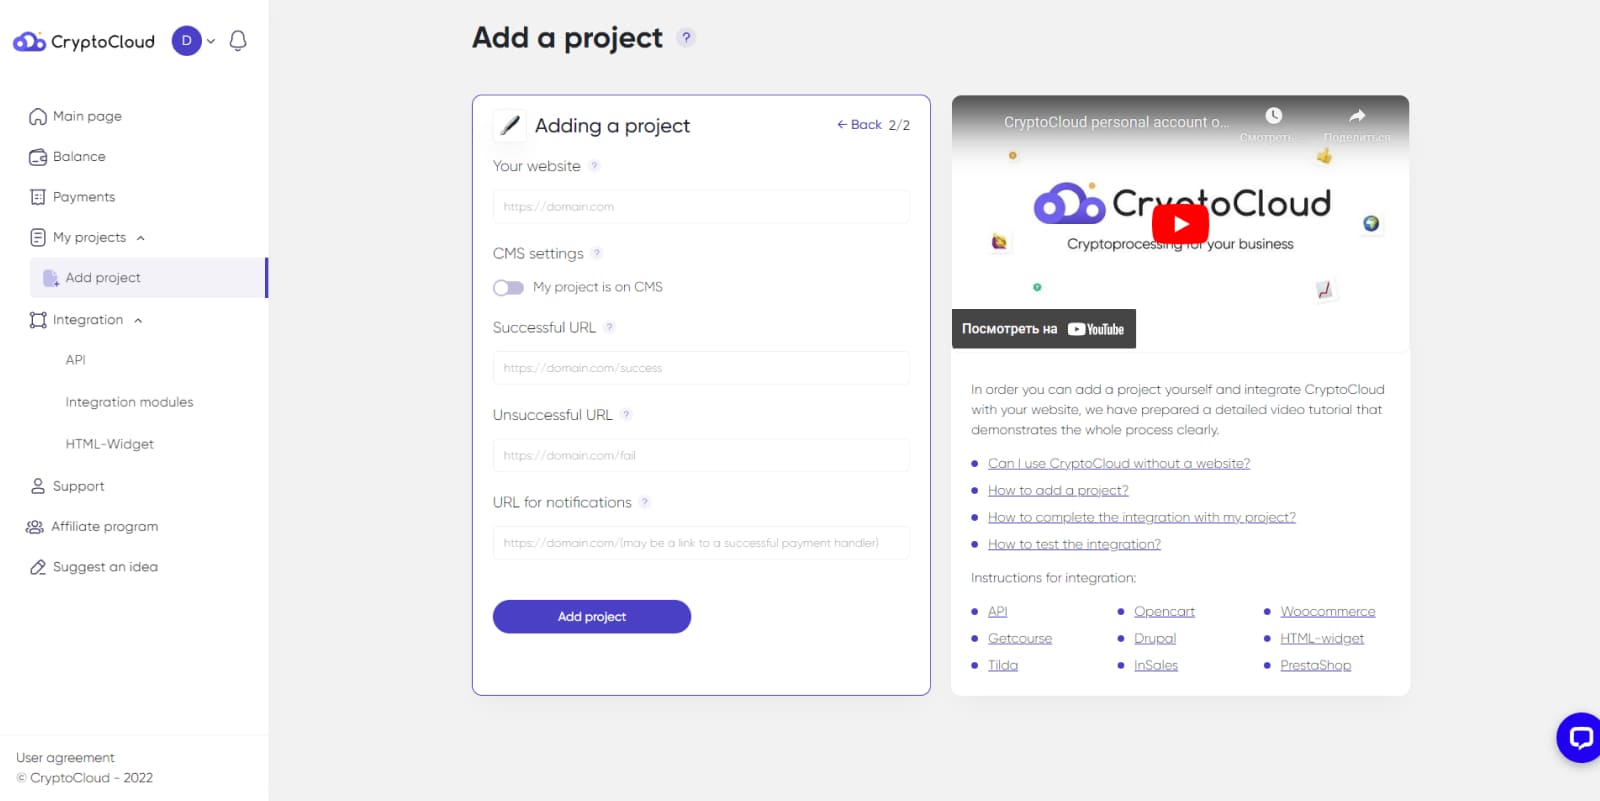 The process of adding a project to CryptoCloud to accept payments in cryptocurrency.